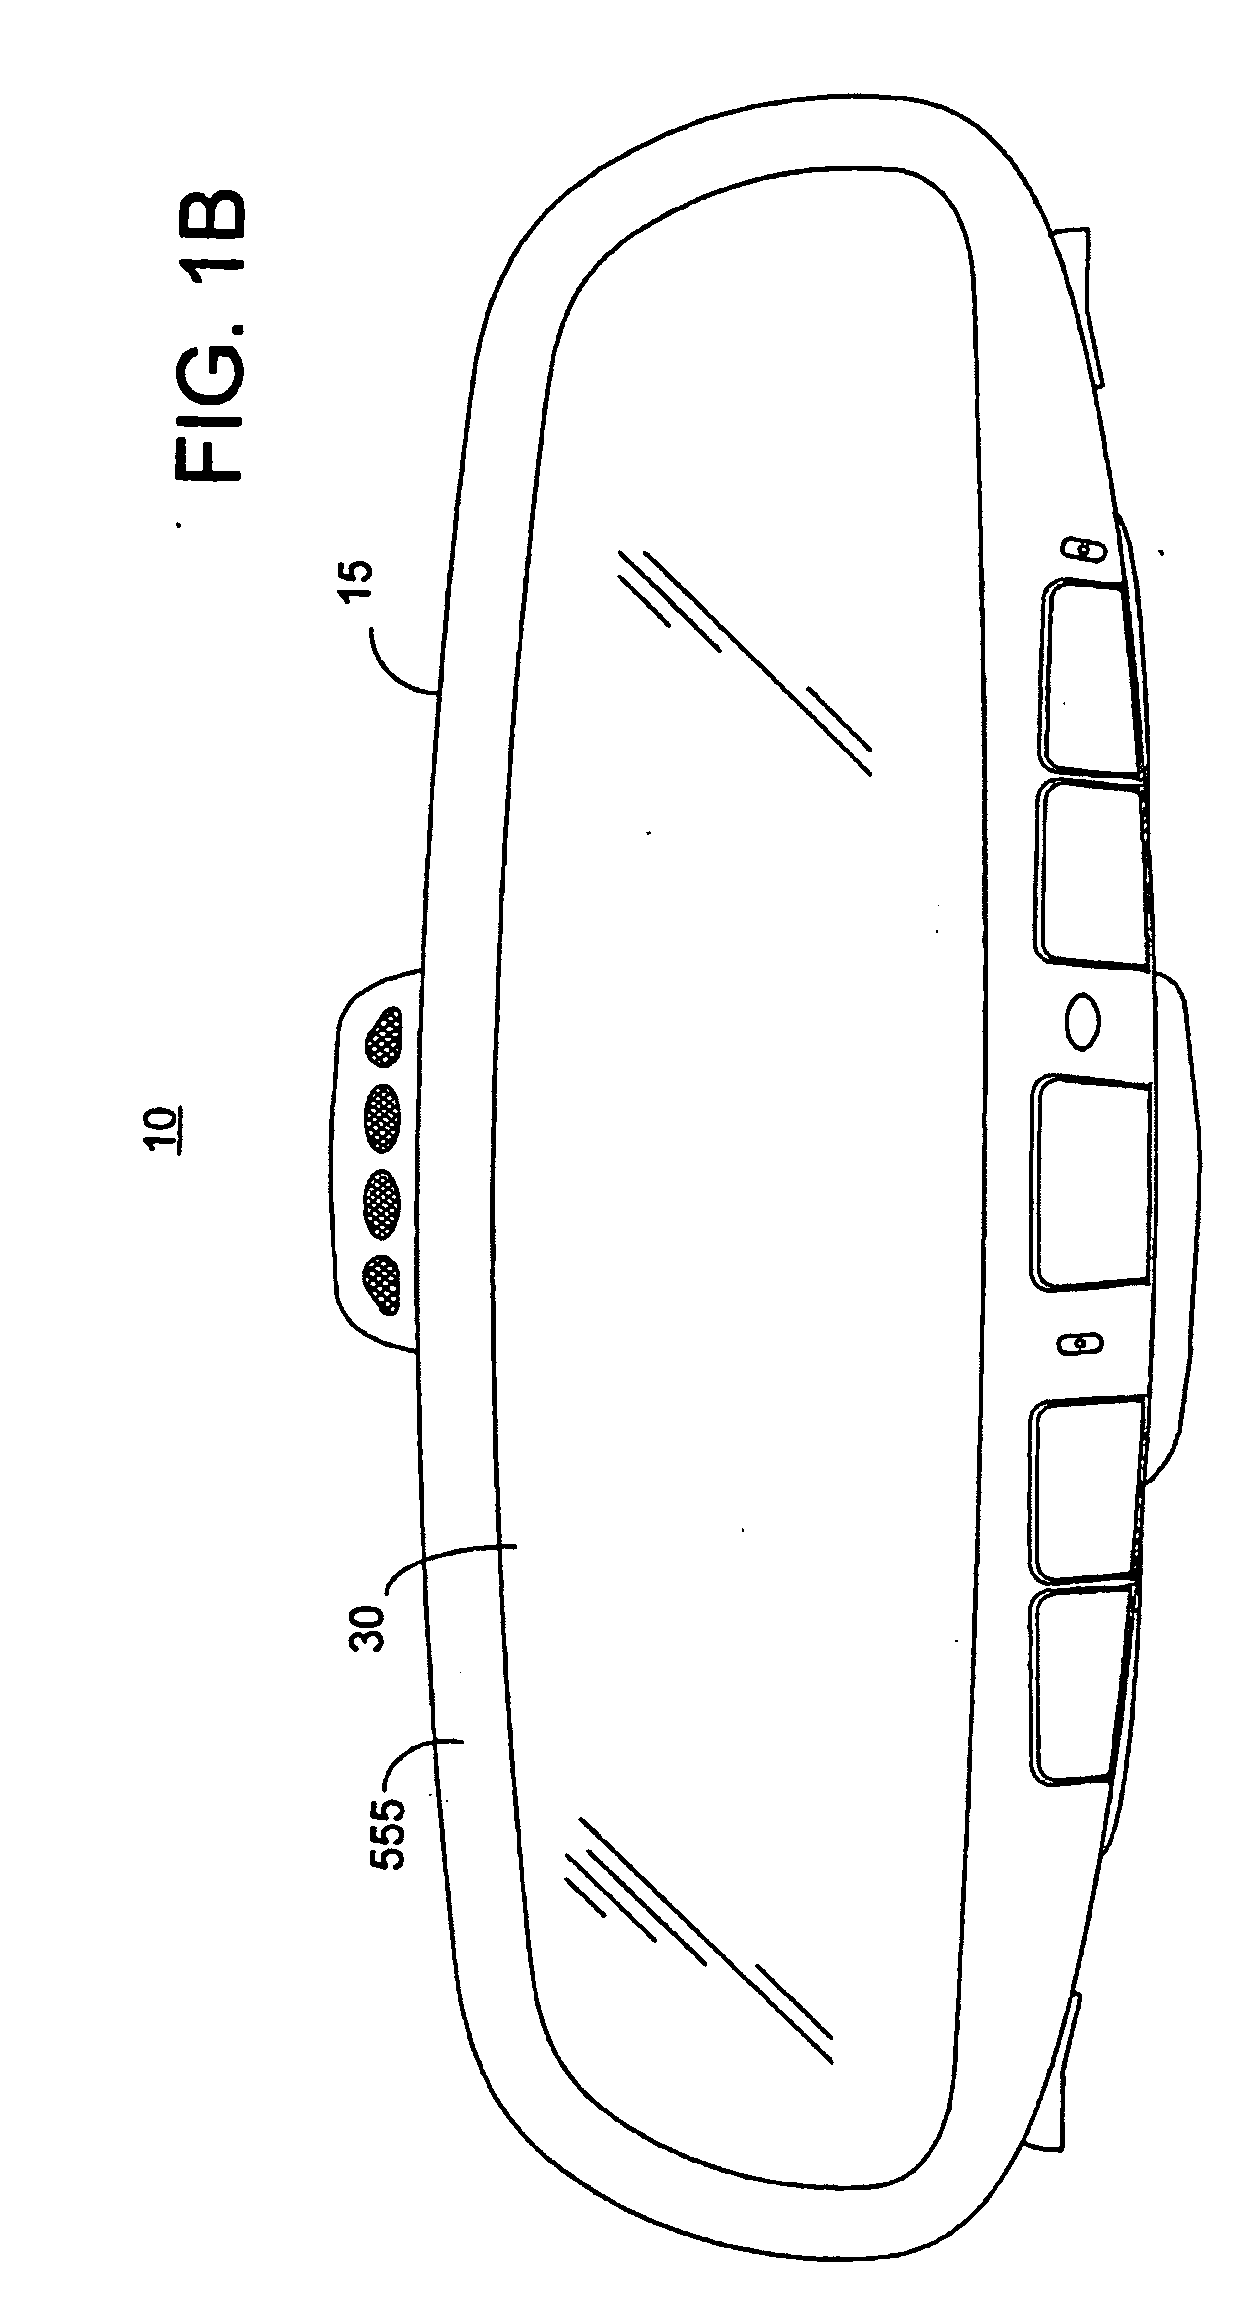 Vehicle Rearview Assembly Including a Display for Displaying Video Captured by a Camera and User Instructions